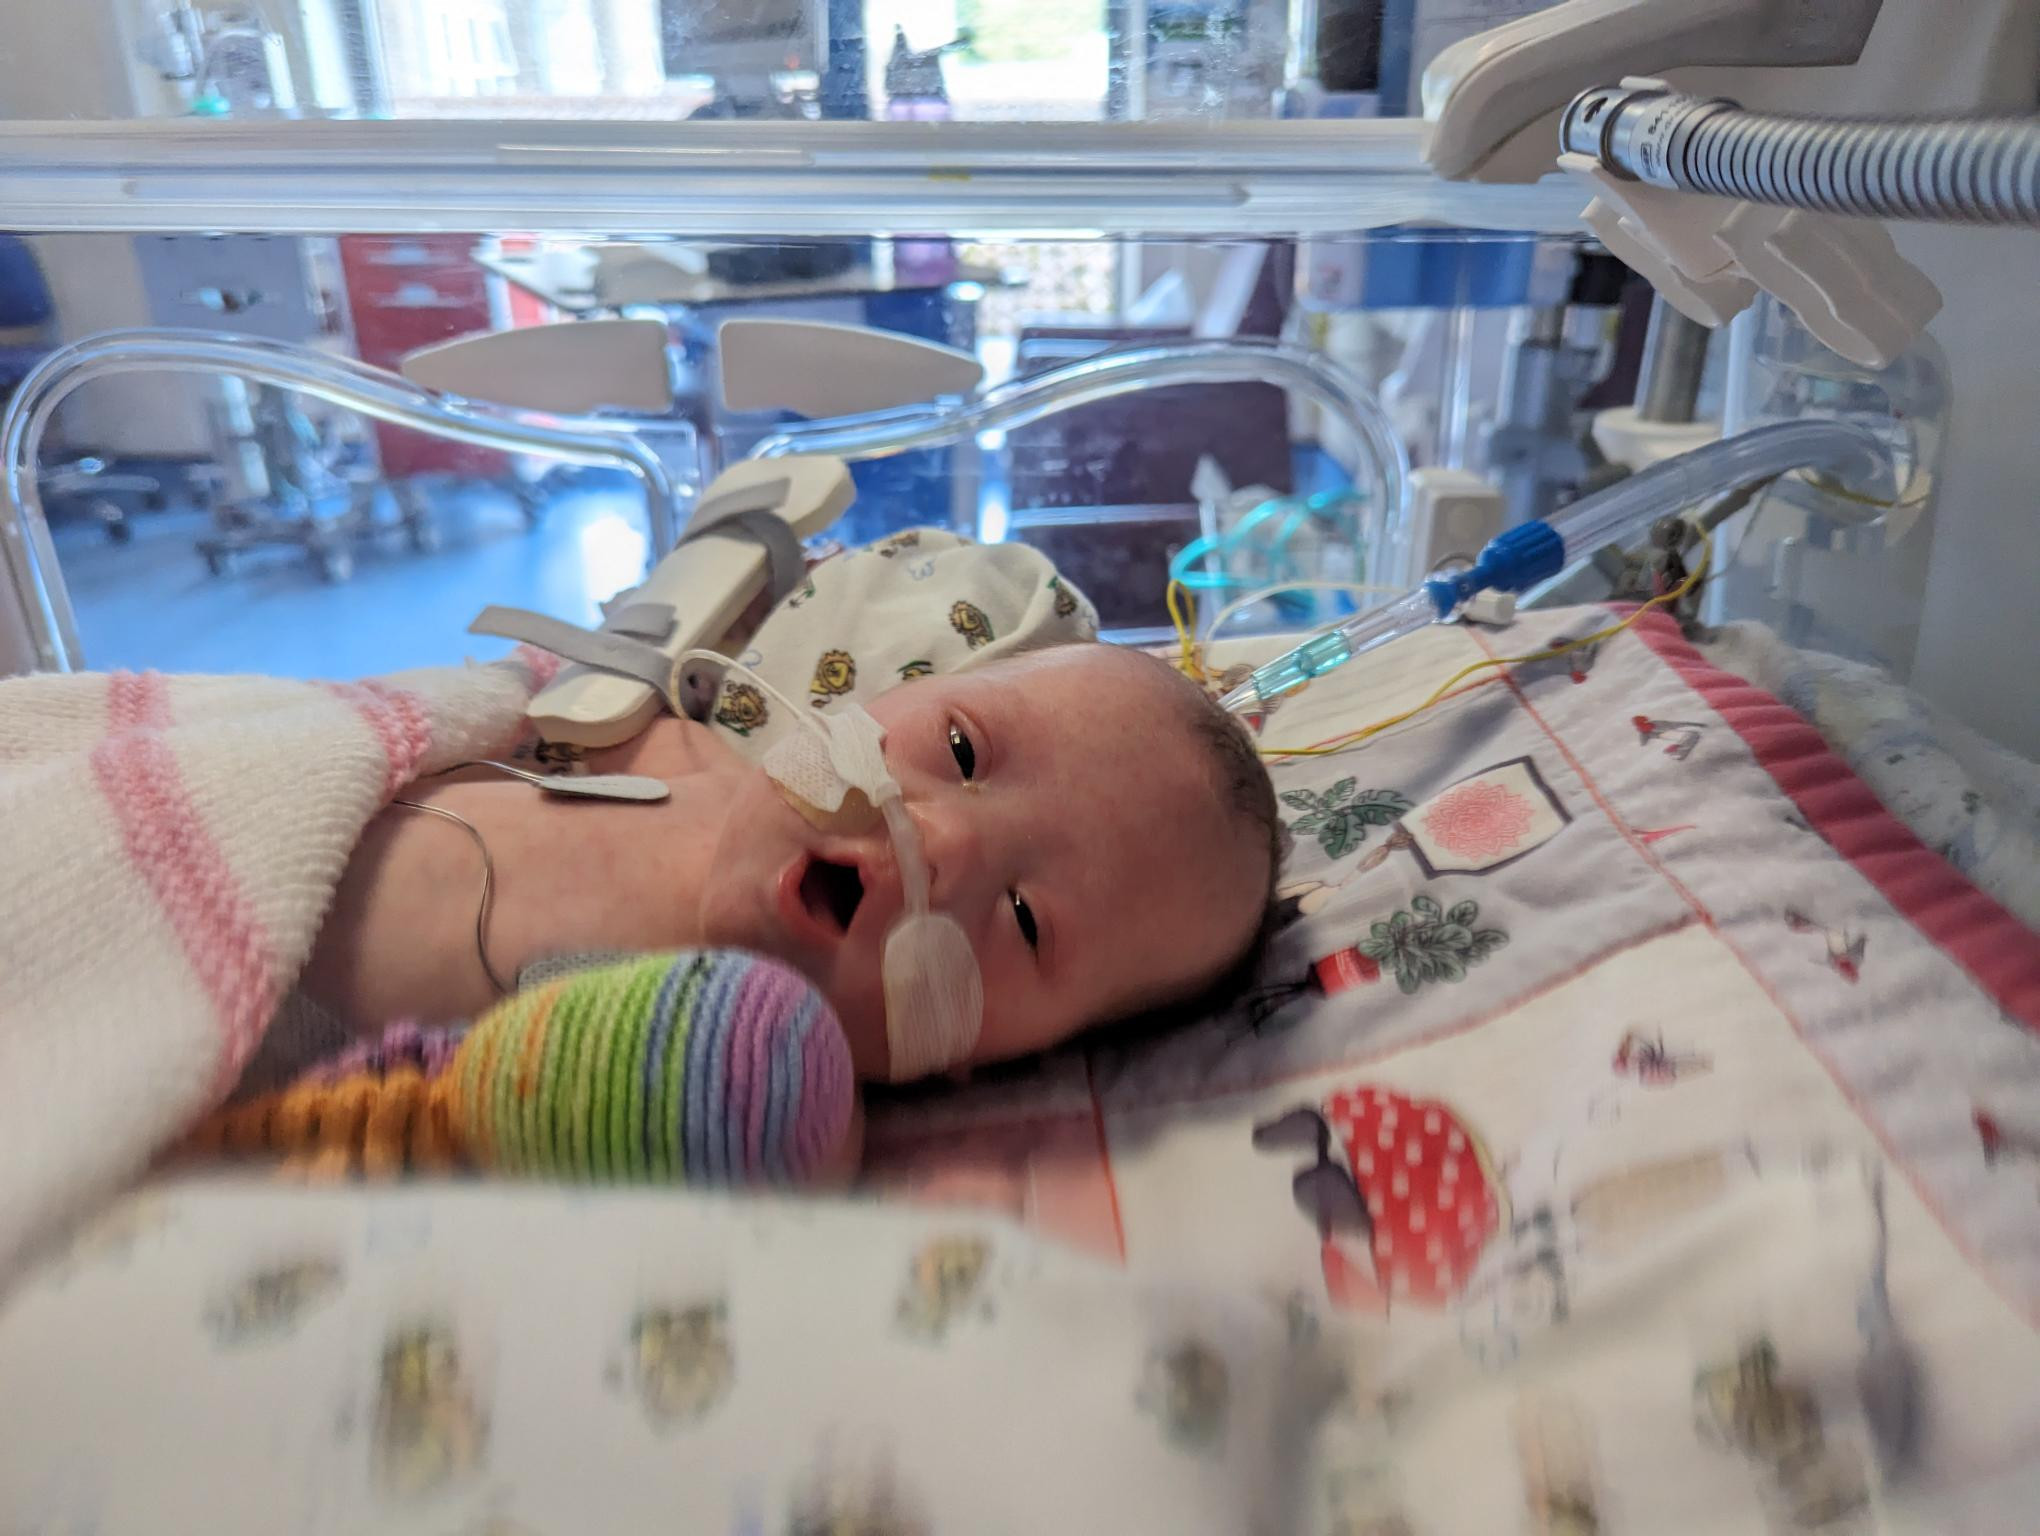 Baby Darcy in hospital - image of a baby with a tube in her nose in a NICU crib